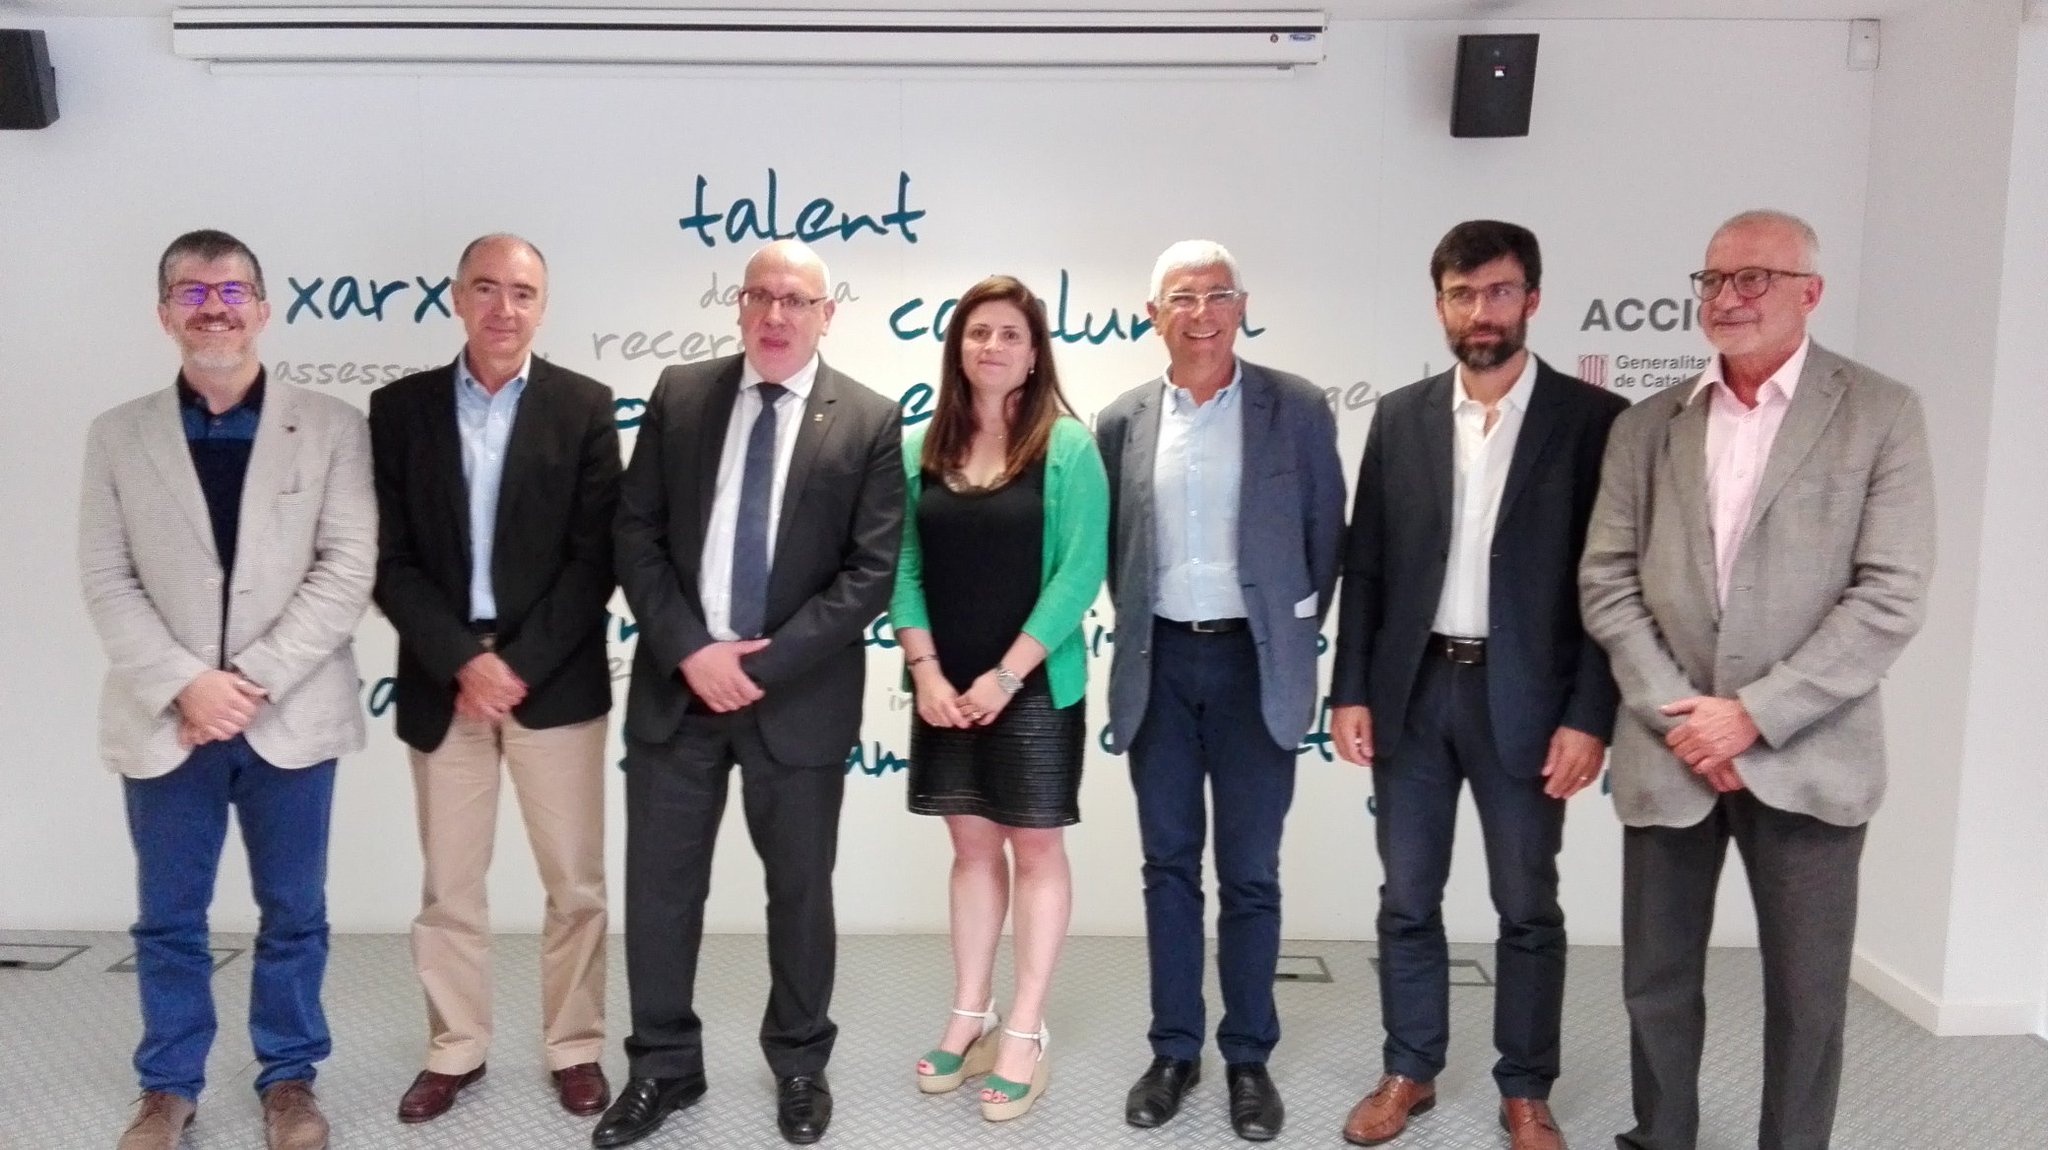 Catalonia's Minister for Business and Knowledge, Jordi Baiget, and the Director General of Industry, Núria Betriu, with the leaders of the 5 RIS3CAT communities. (Image: ACCIO) 